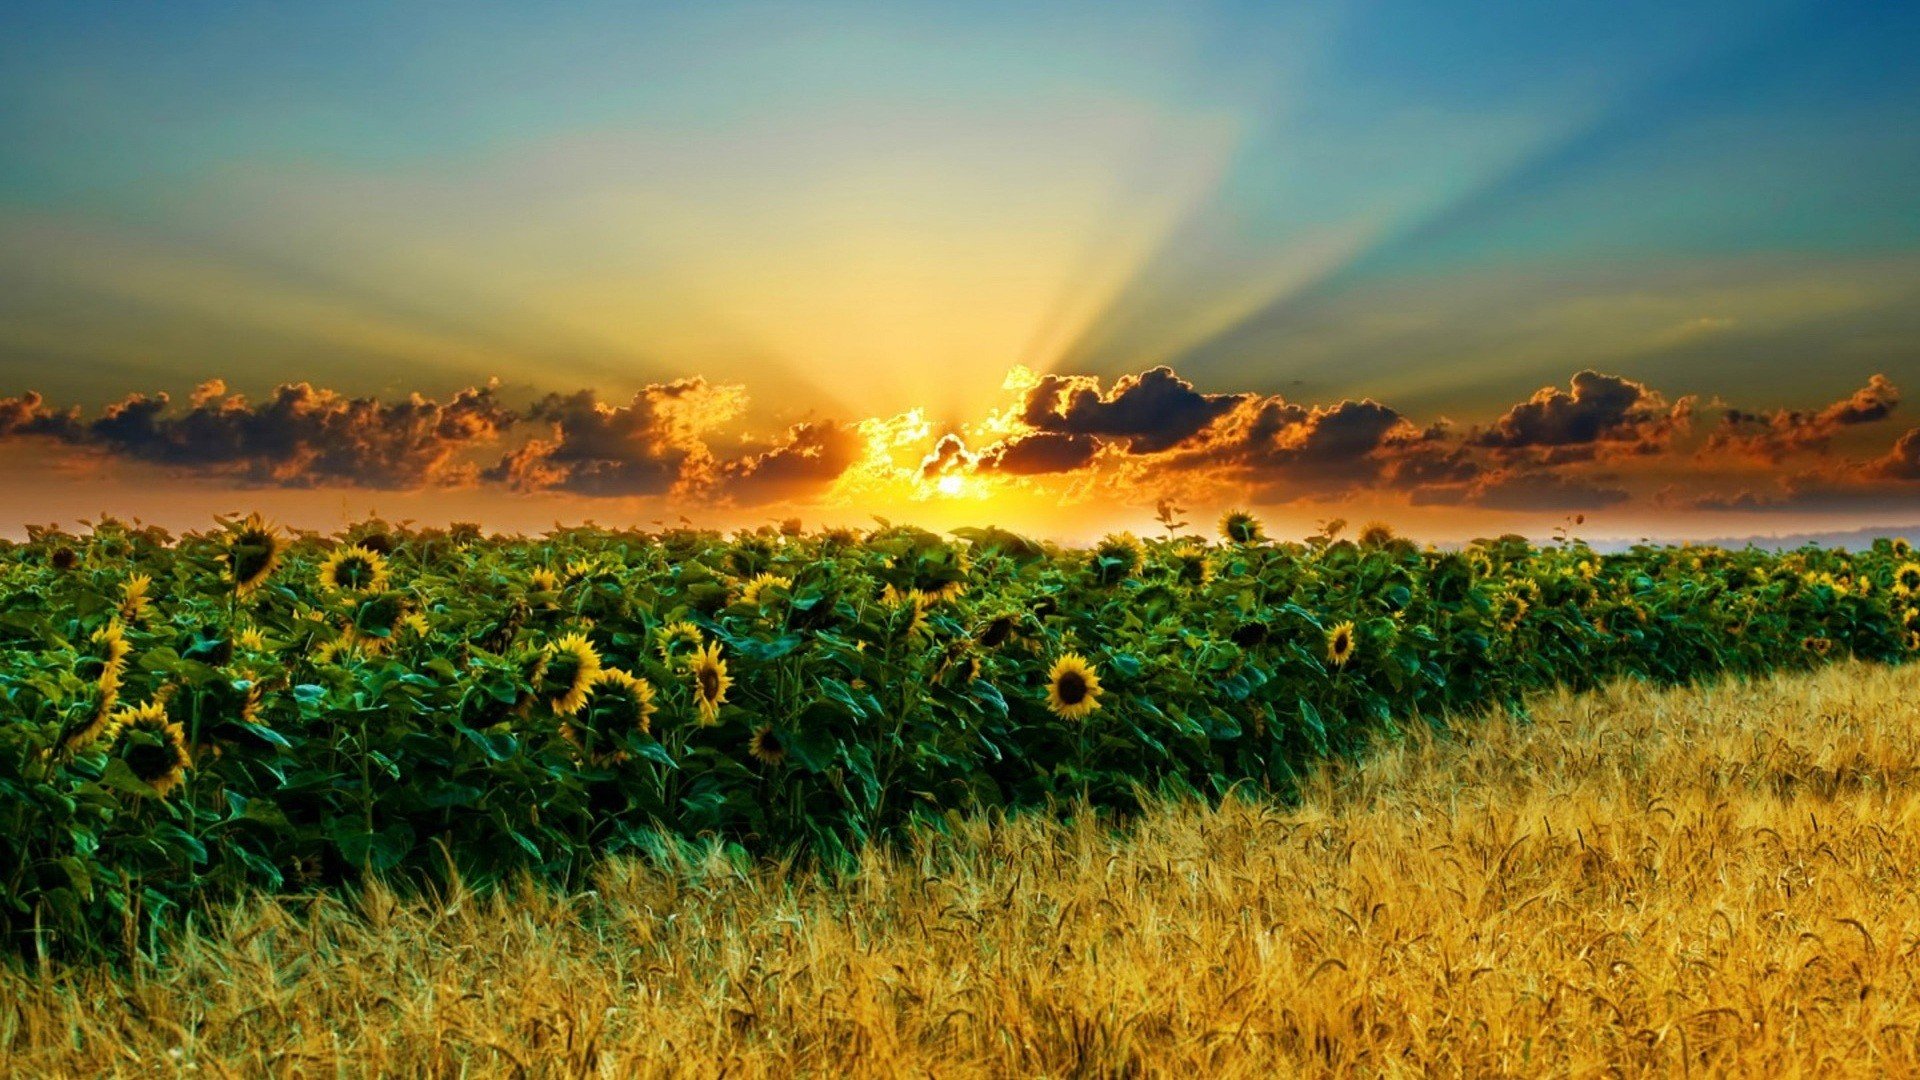 sunset, Clouds, Landscapes, Nature, Fields, Wheat, Sunflowers Wallpaper